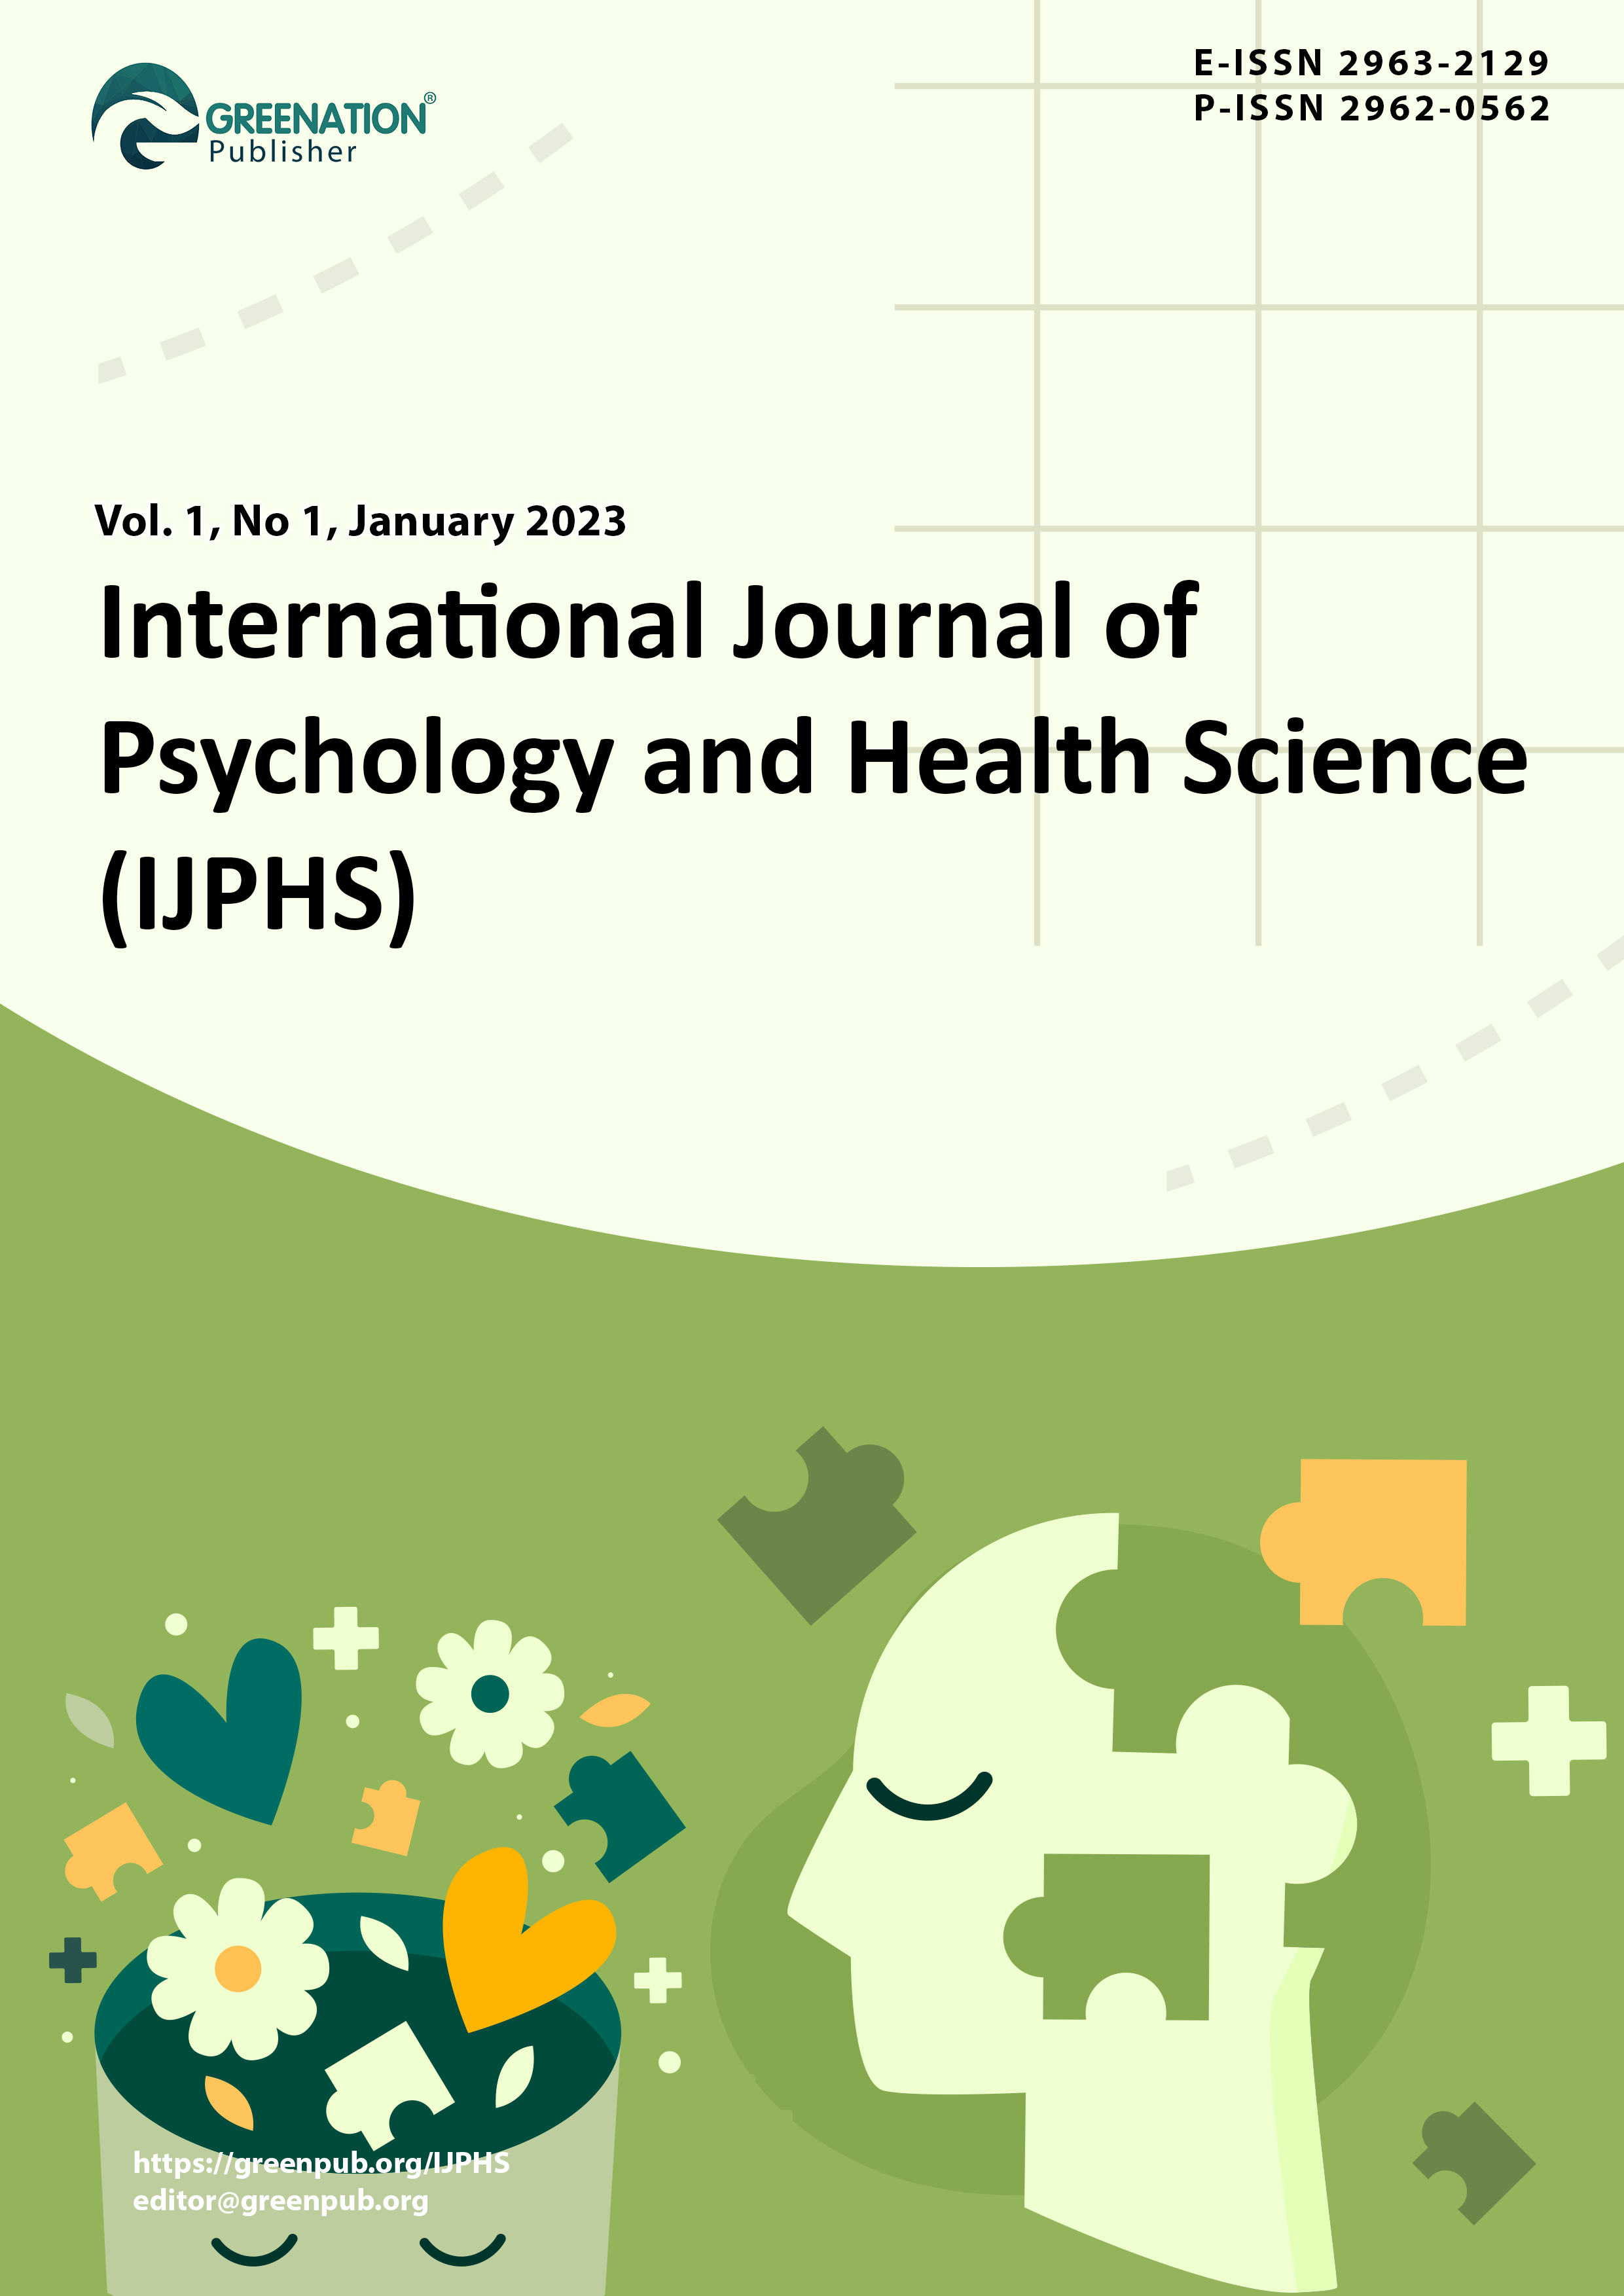 					View Vol. 1 No. 4 (2023): International Journal of Psychology and Health Science (October-December 2023)
				